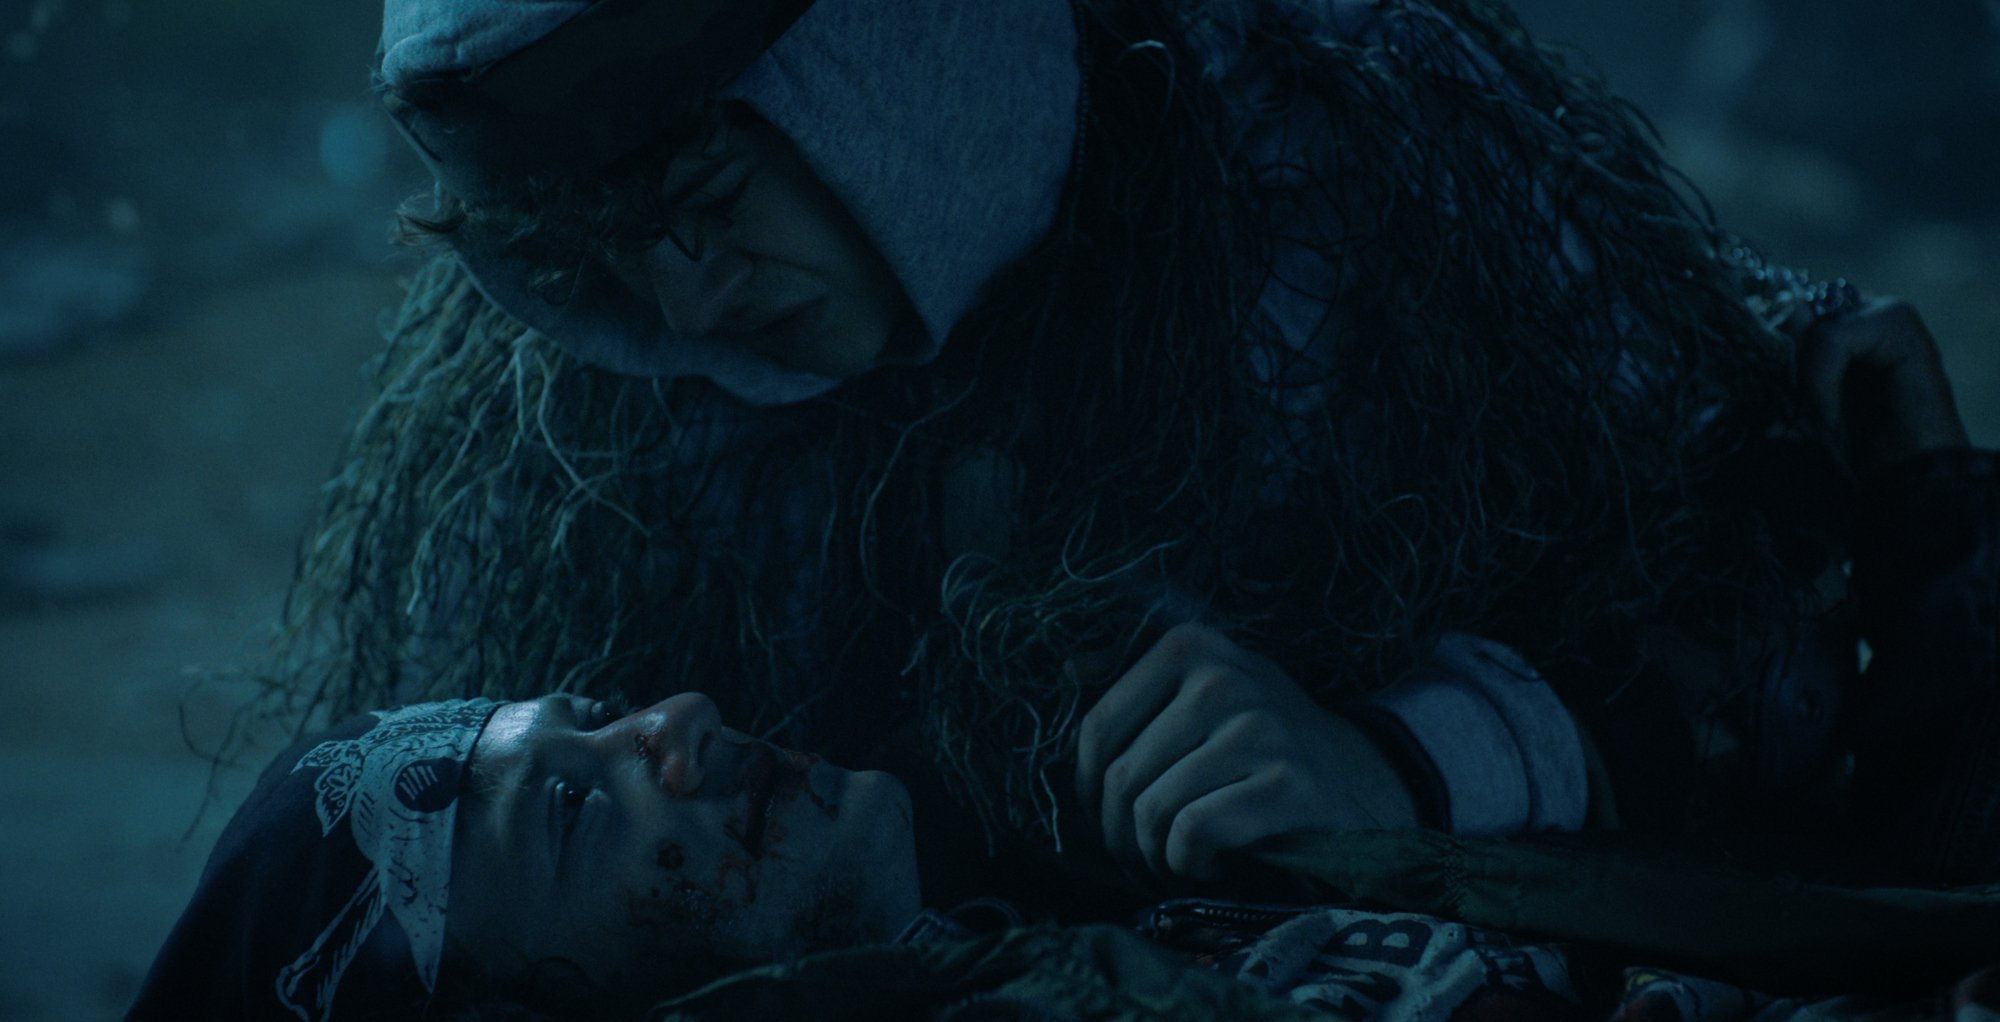 Dustin holding Eddie during his death in 'Stranger Things' 4.